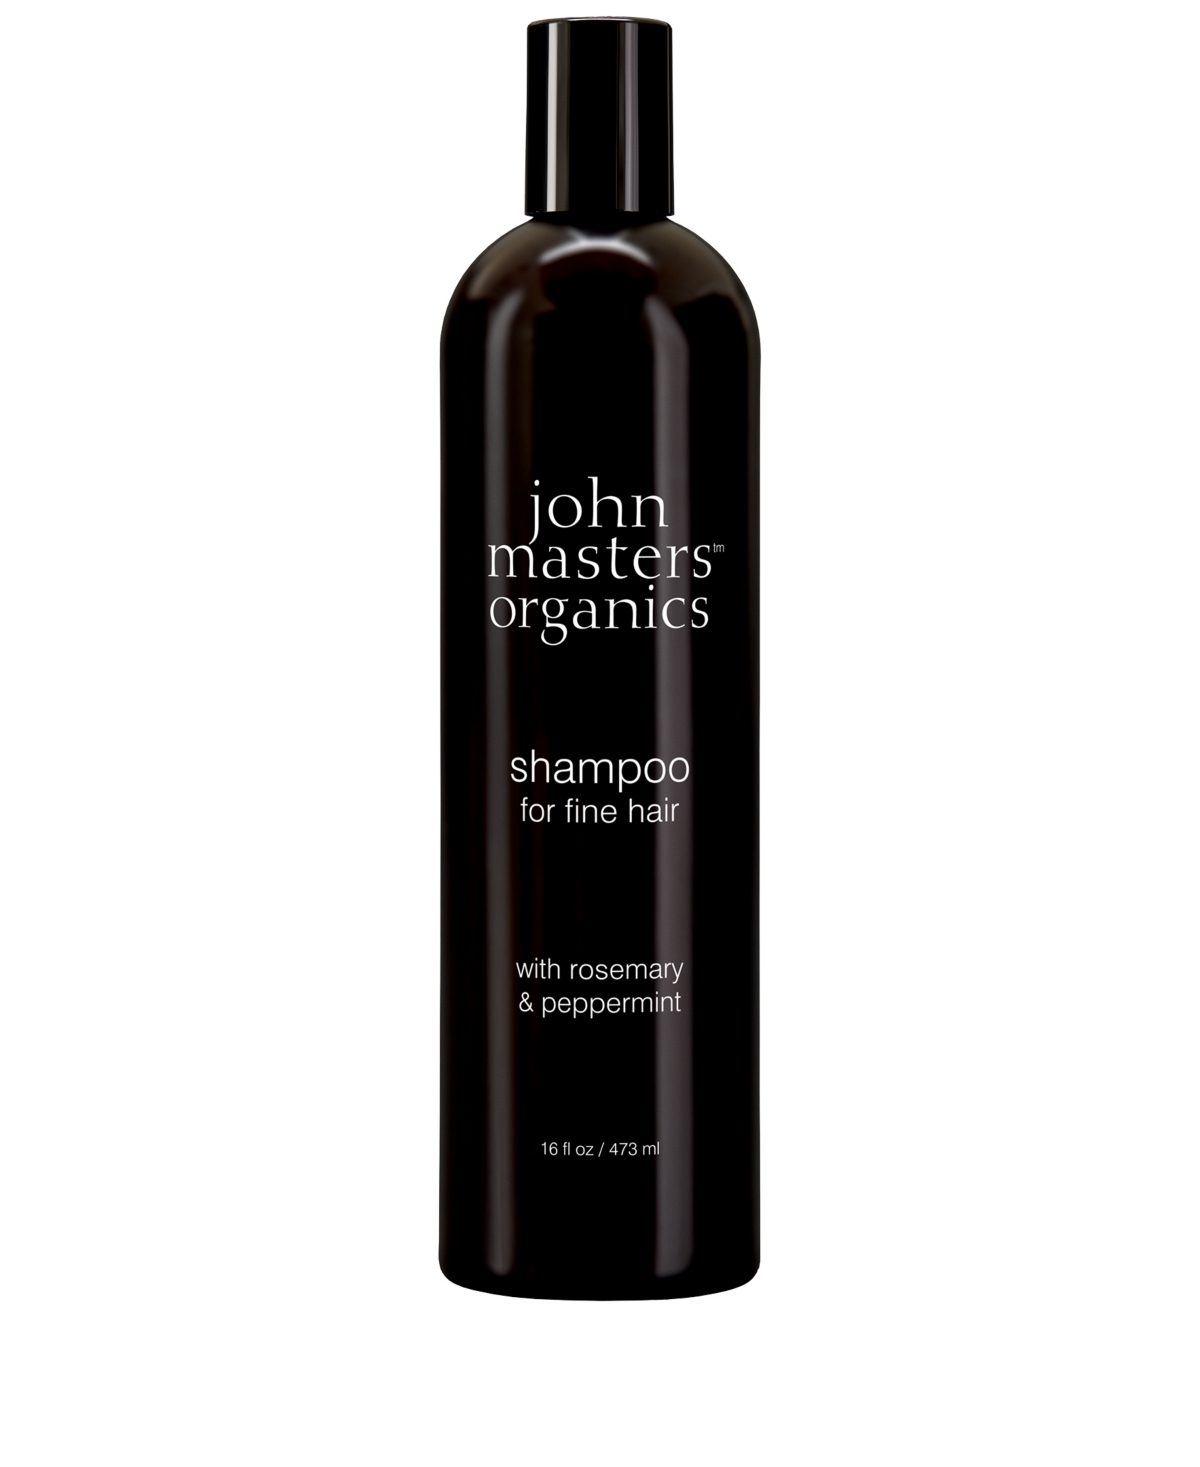 Shampoo For Fine Hair With Rosemary & Peppermint, 16 oz.